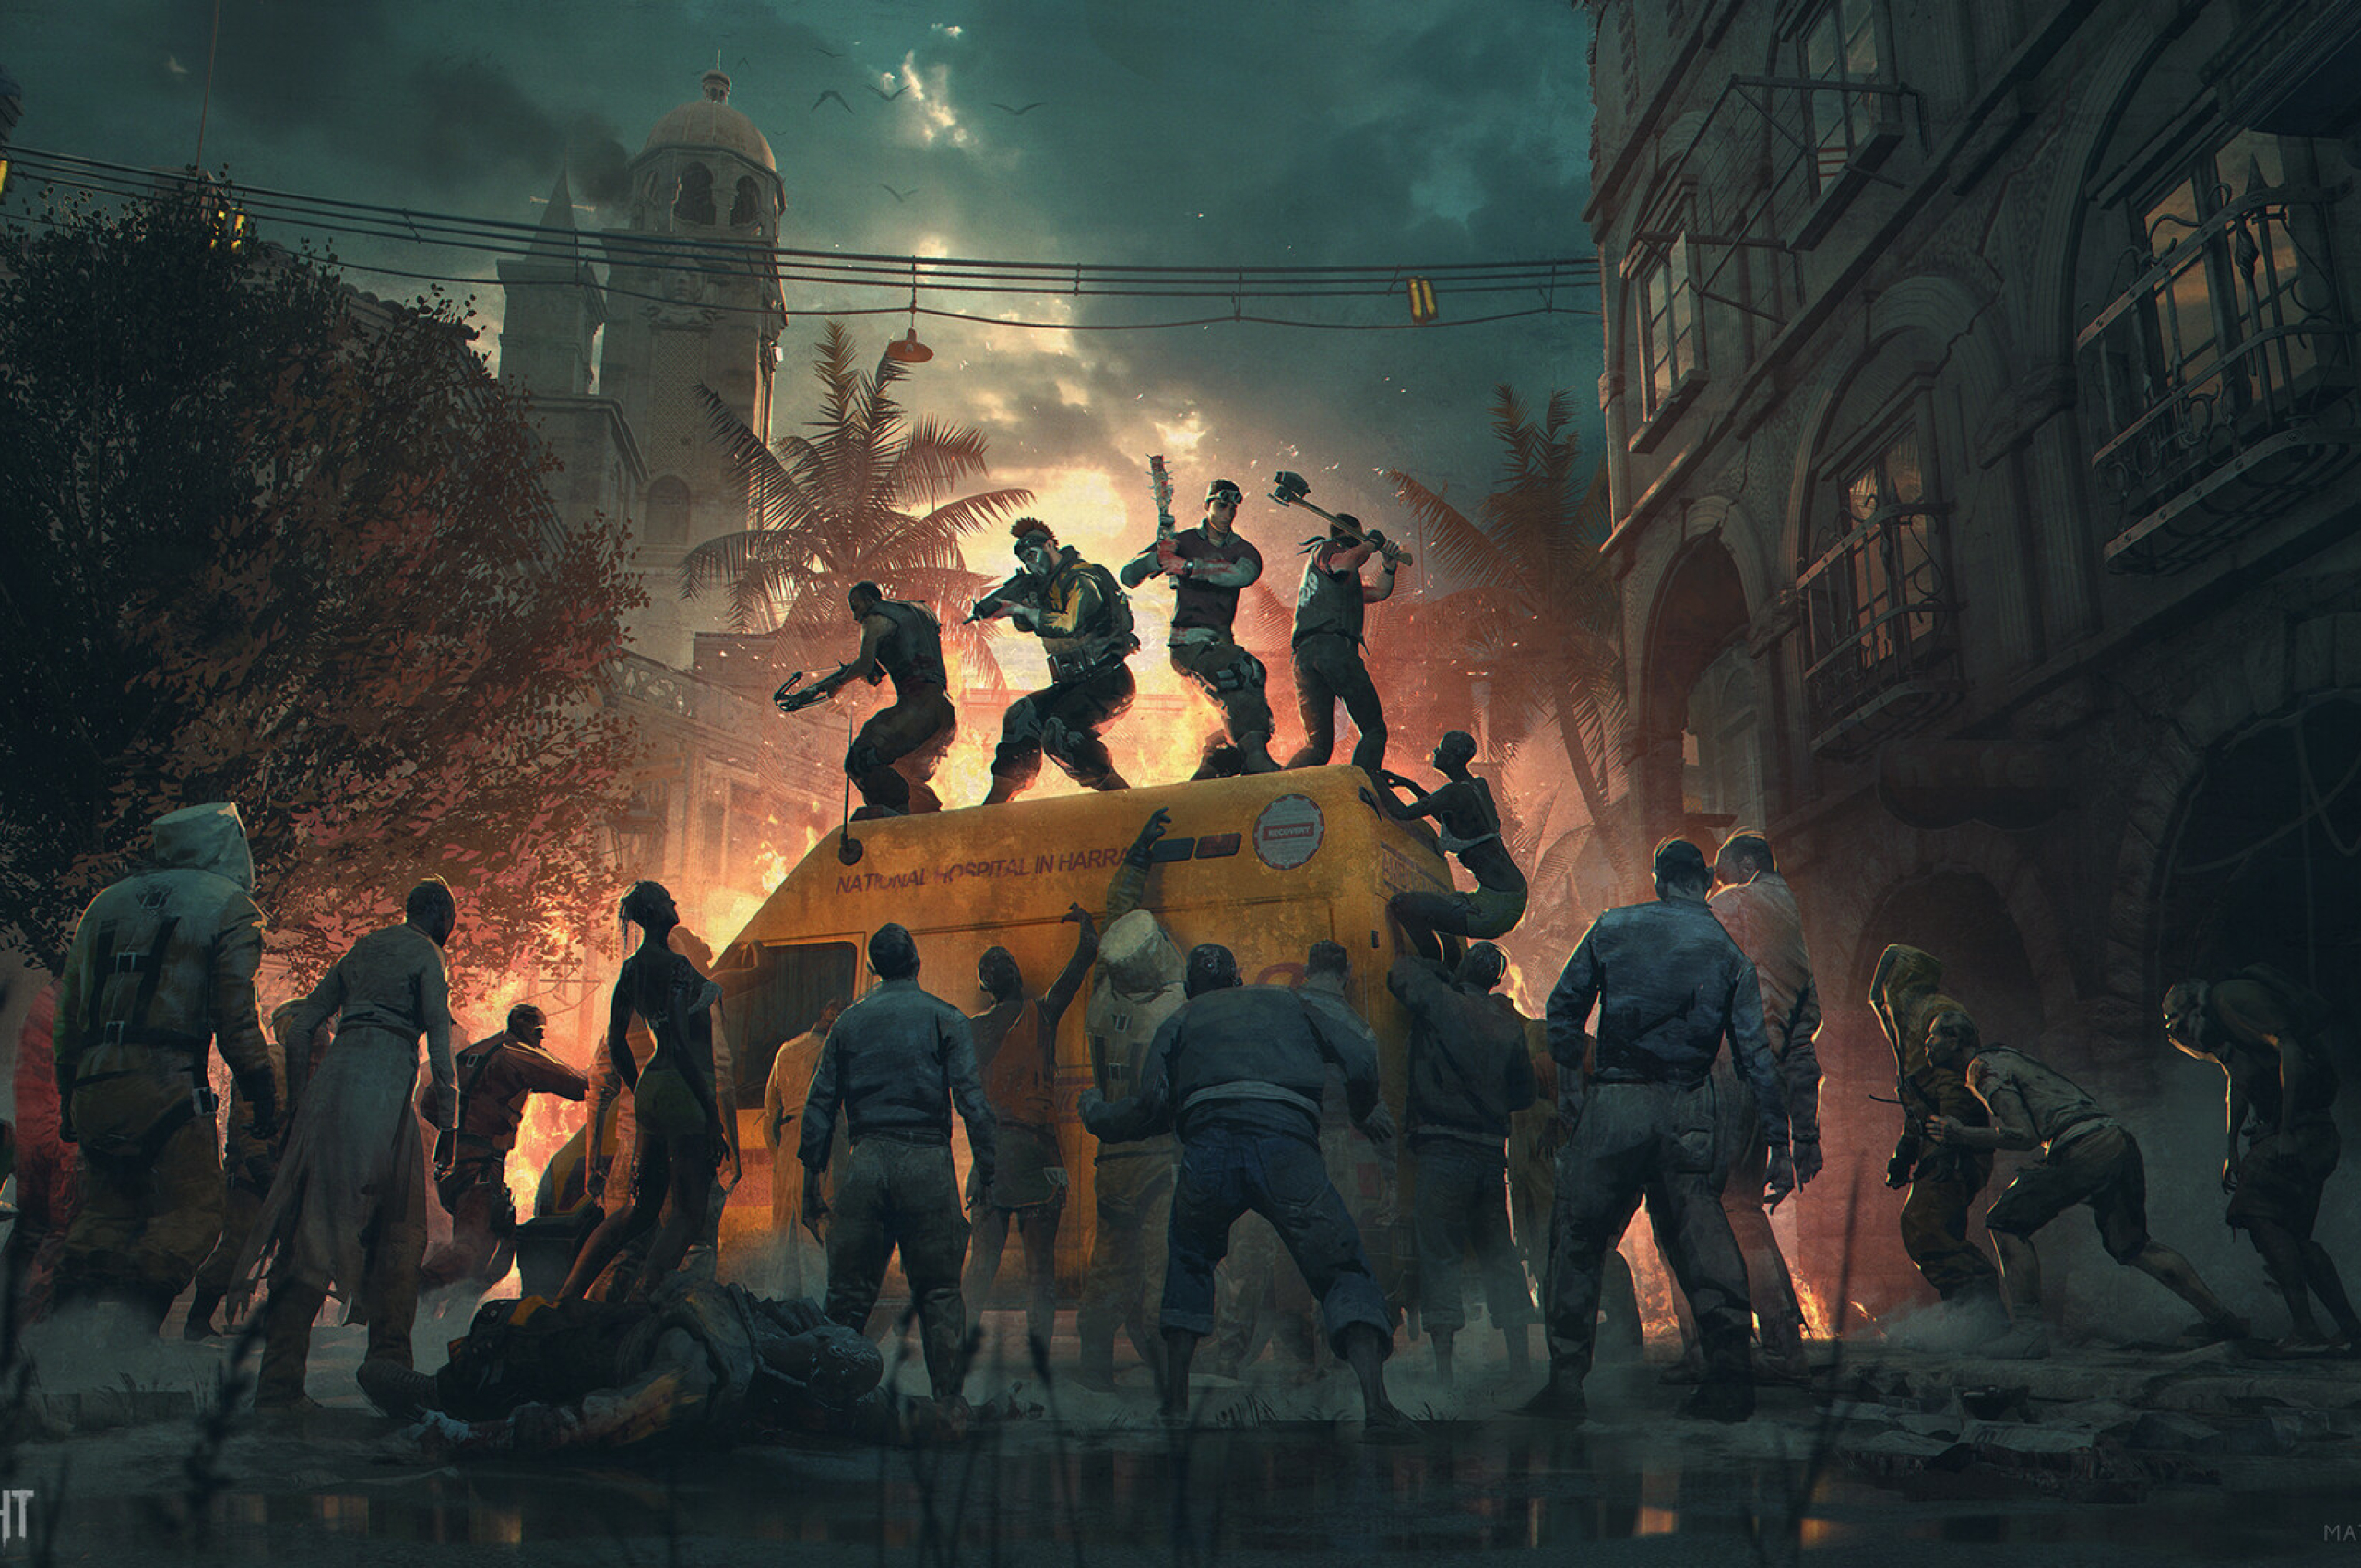 Dying Light vs Zombies (2560x1700) Resolution Wallpaper.